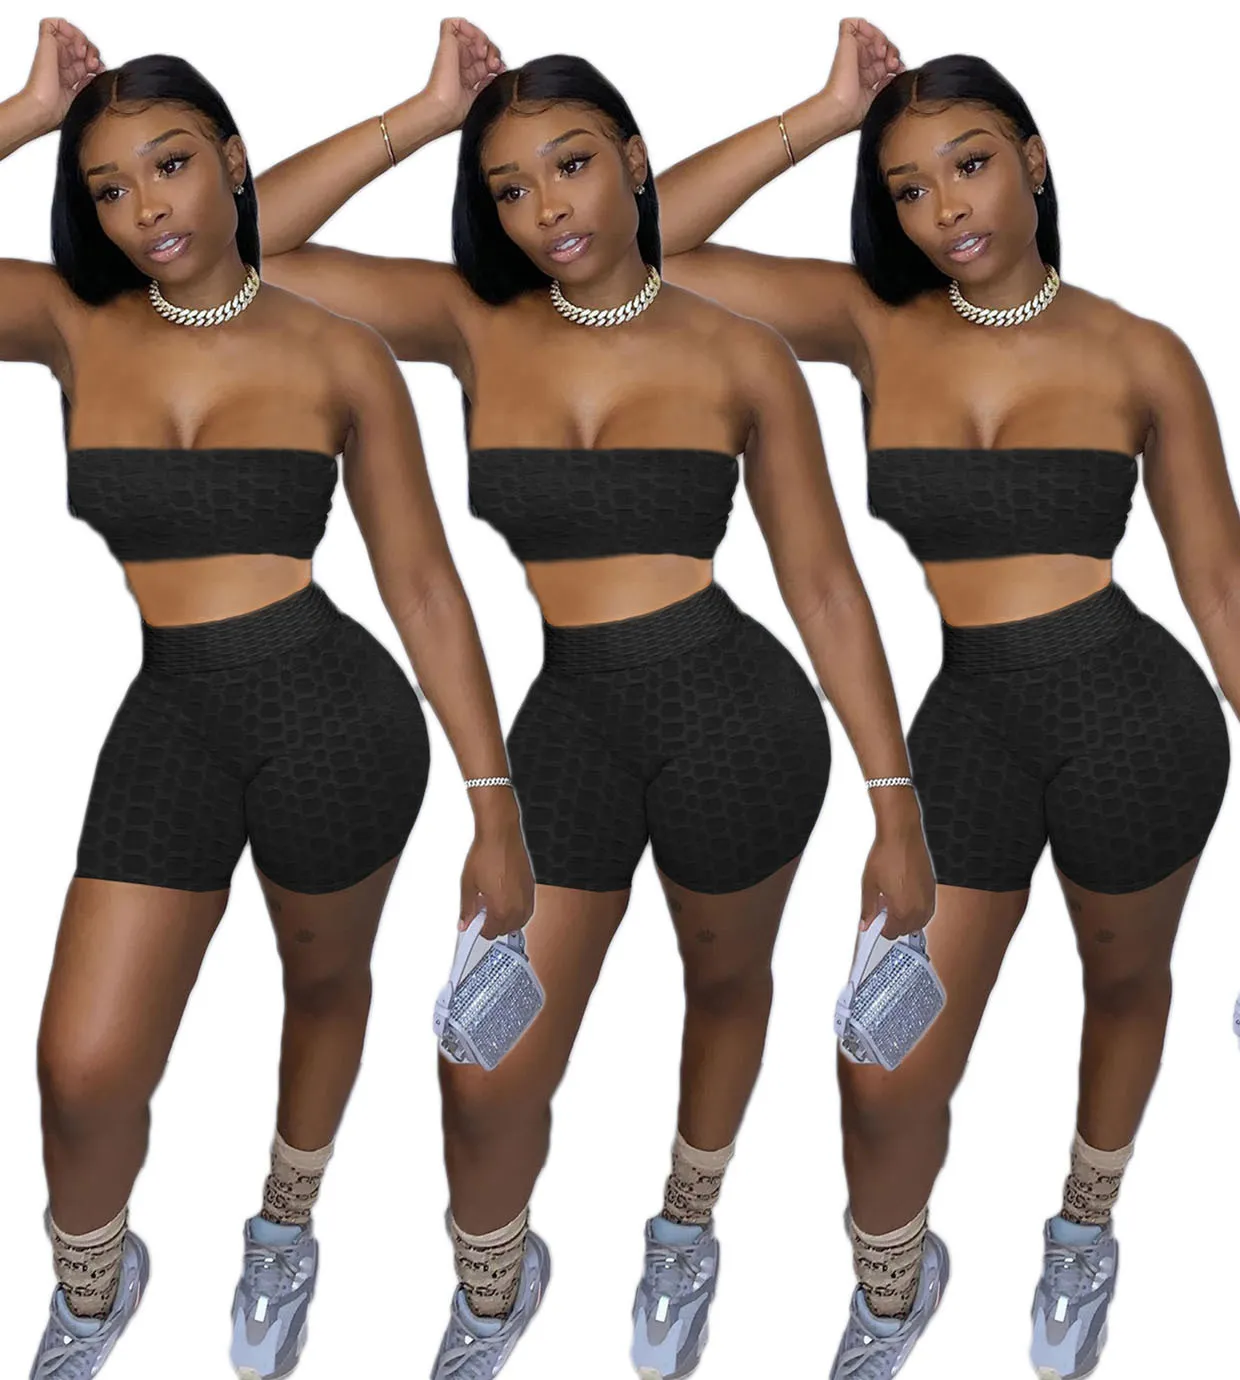 Women Tracksuits short set Yoga Outfits Tight Sexy Strapless Top Small Bra Shorts Leisure Sports High Elasticity Suit